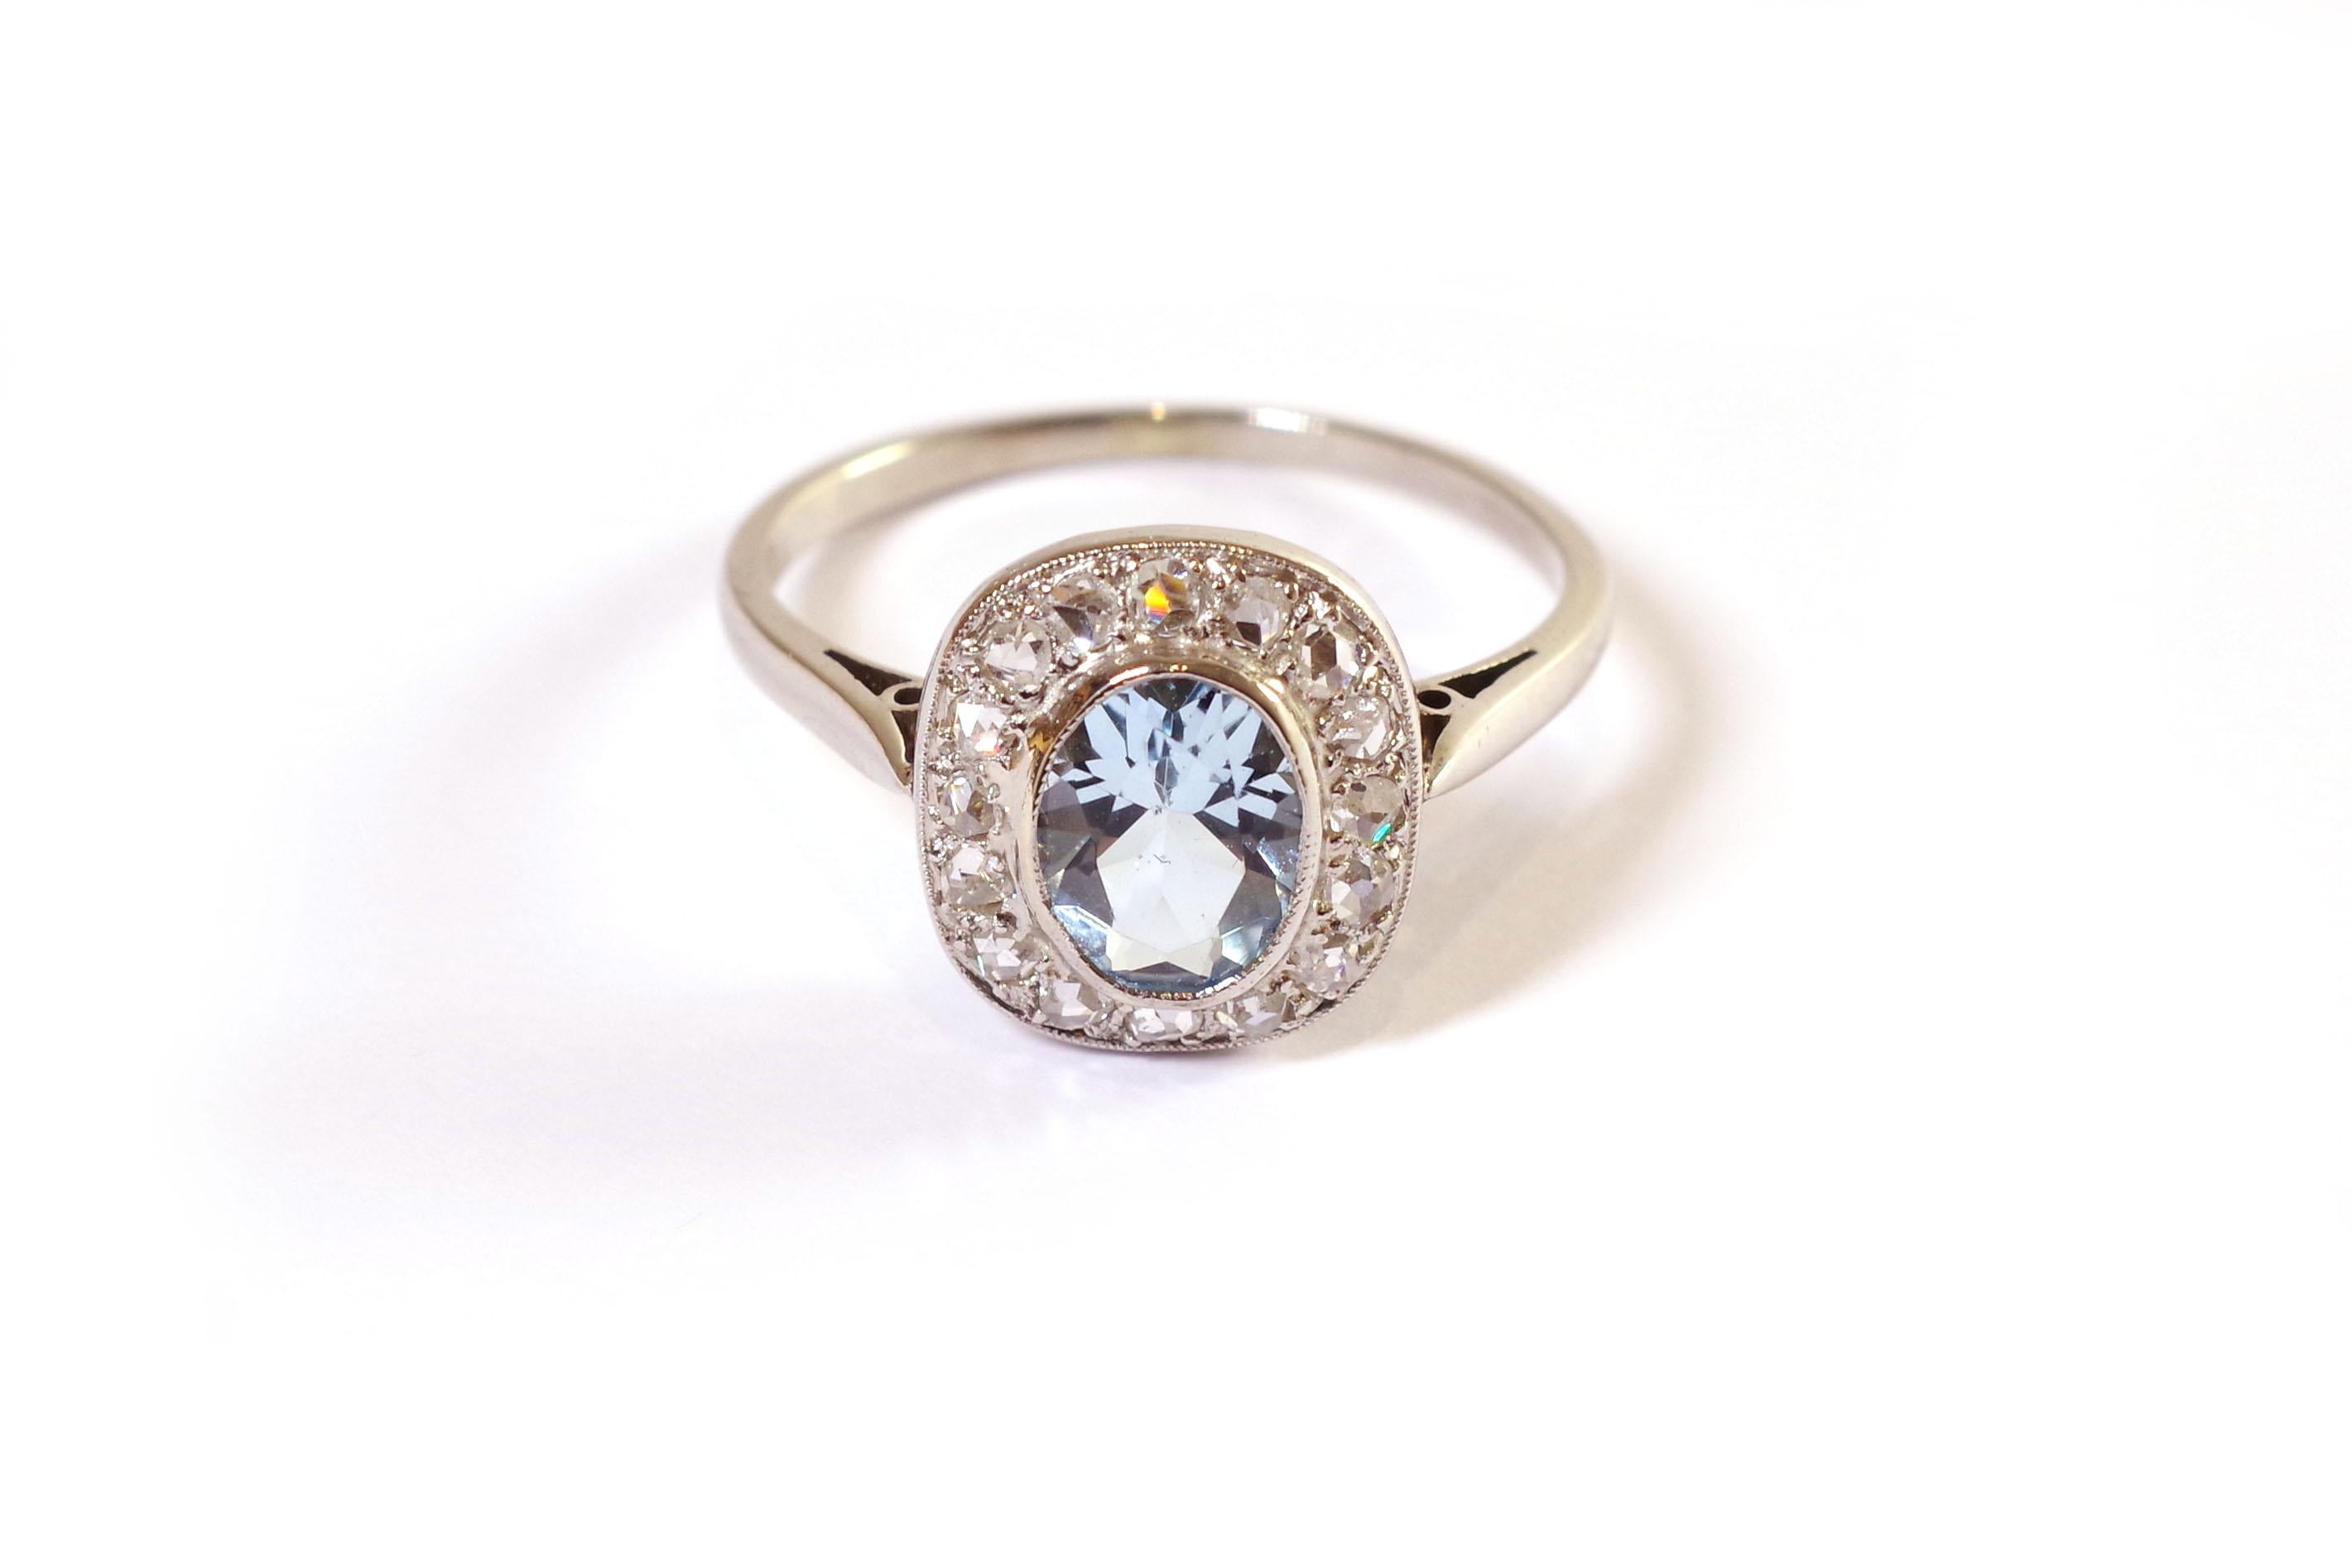 Belle Epoque aquamarine diamonds ring in gold and platinum. Antique ring set with an aquamarine in a surround of sixteen diamonds cut in rose. The setting is closed and pearled. The aquamarine weighs 1.20 carats and has a beautiful ice blue color.